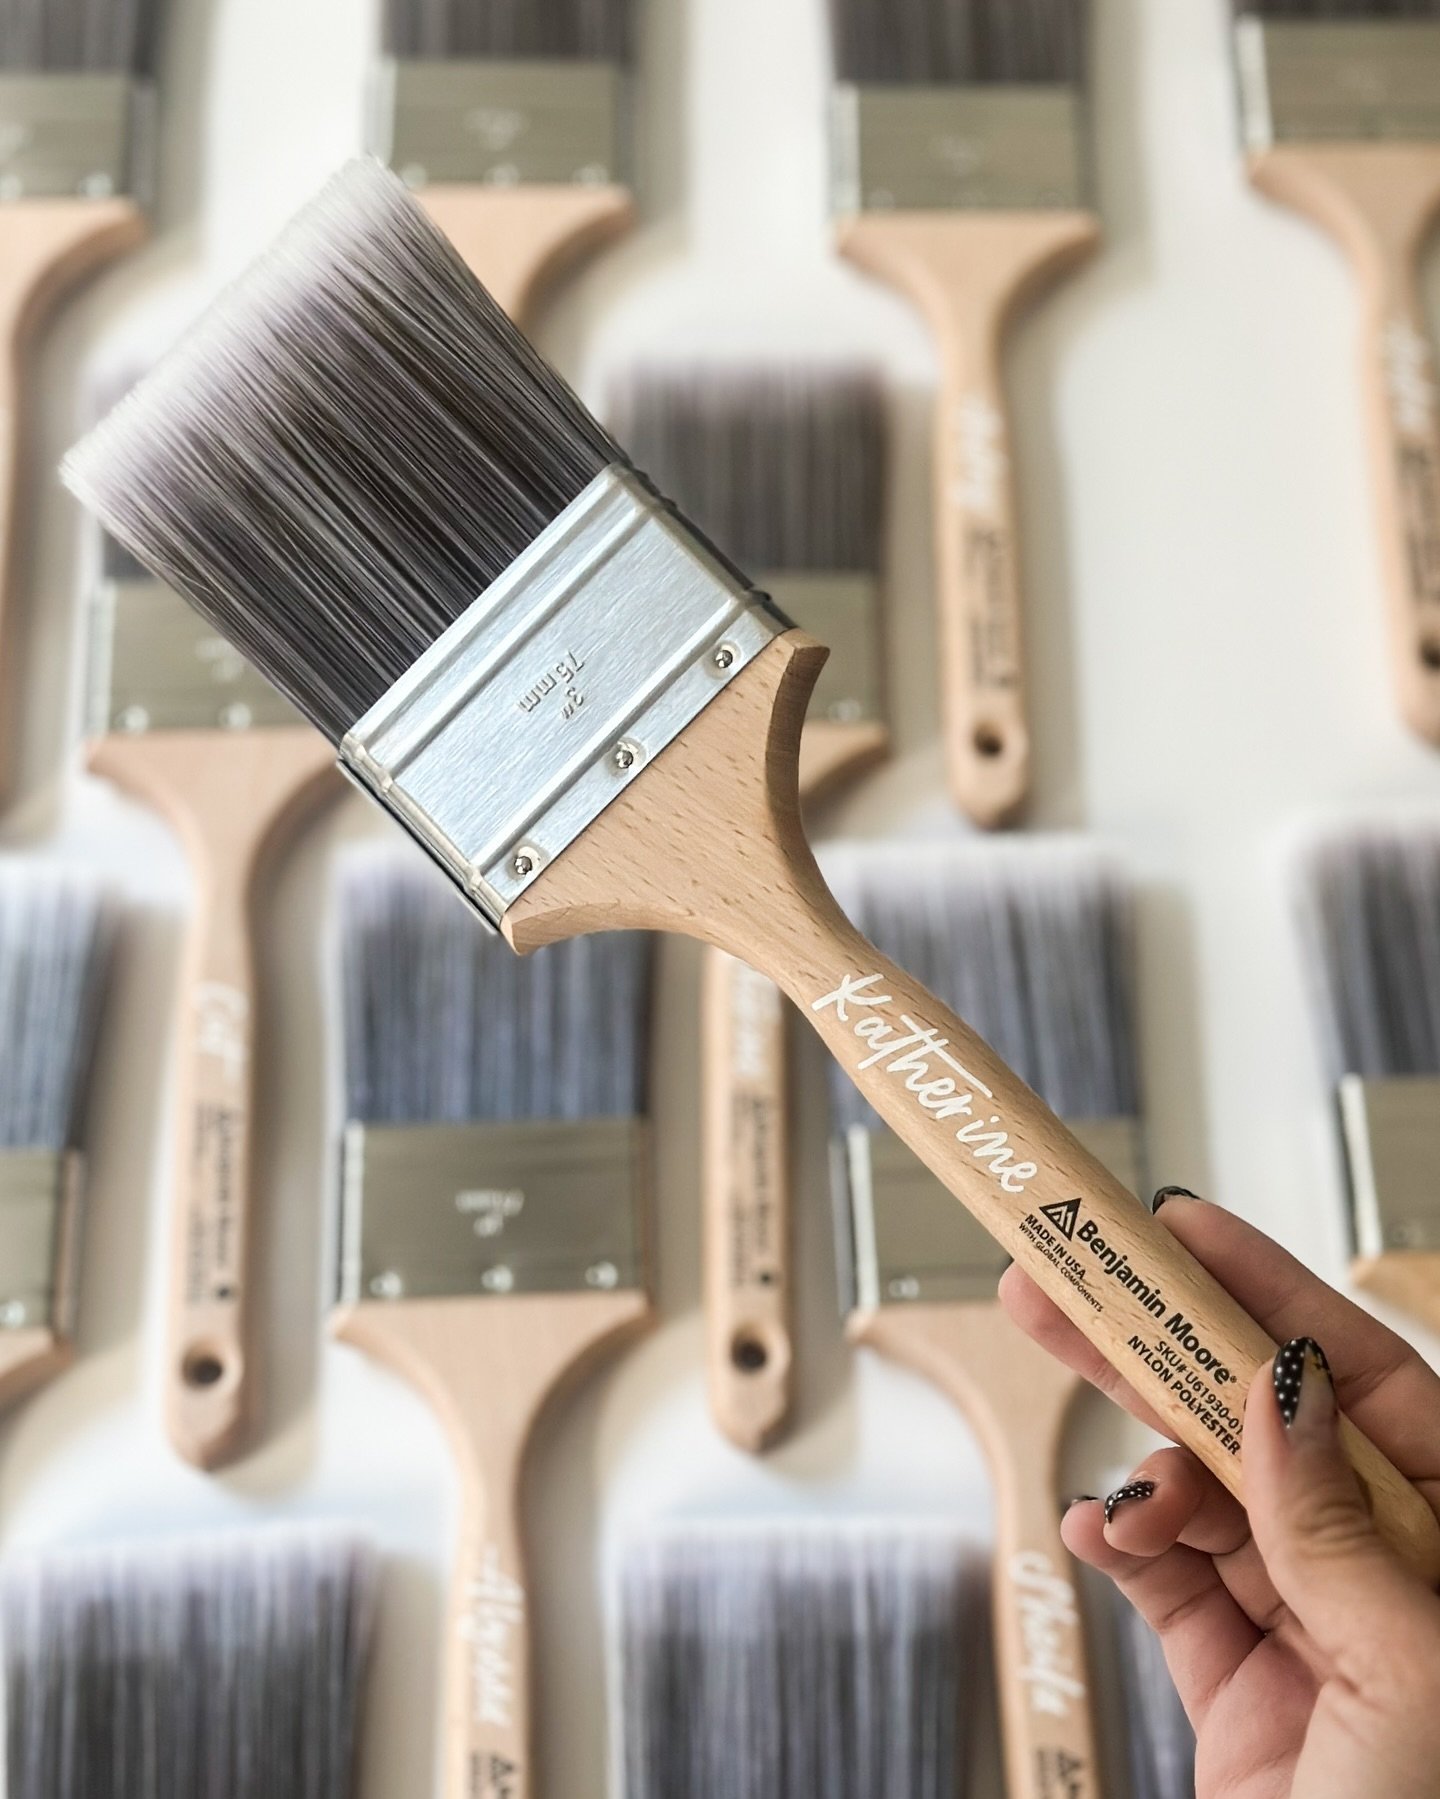 Brushing up on how to be a functioning human after the long weekend&hellip; 🙃🖌️ 

Loved these custom paintbrushes for a @benjaminmoore event from a few weeks back! (Also found it amusing painting large brushes with a tiny one 😂)